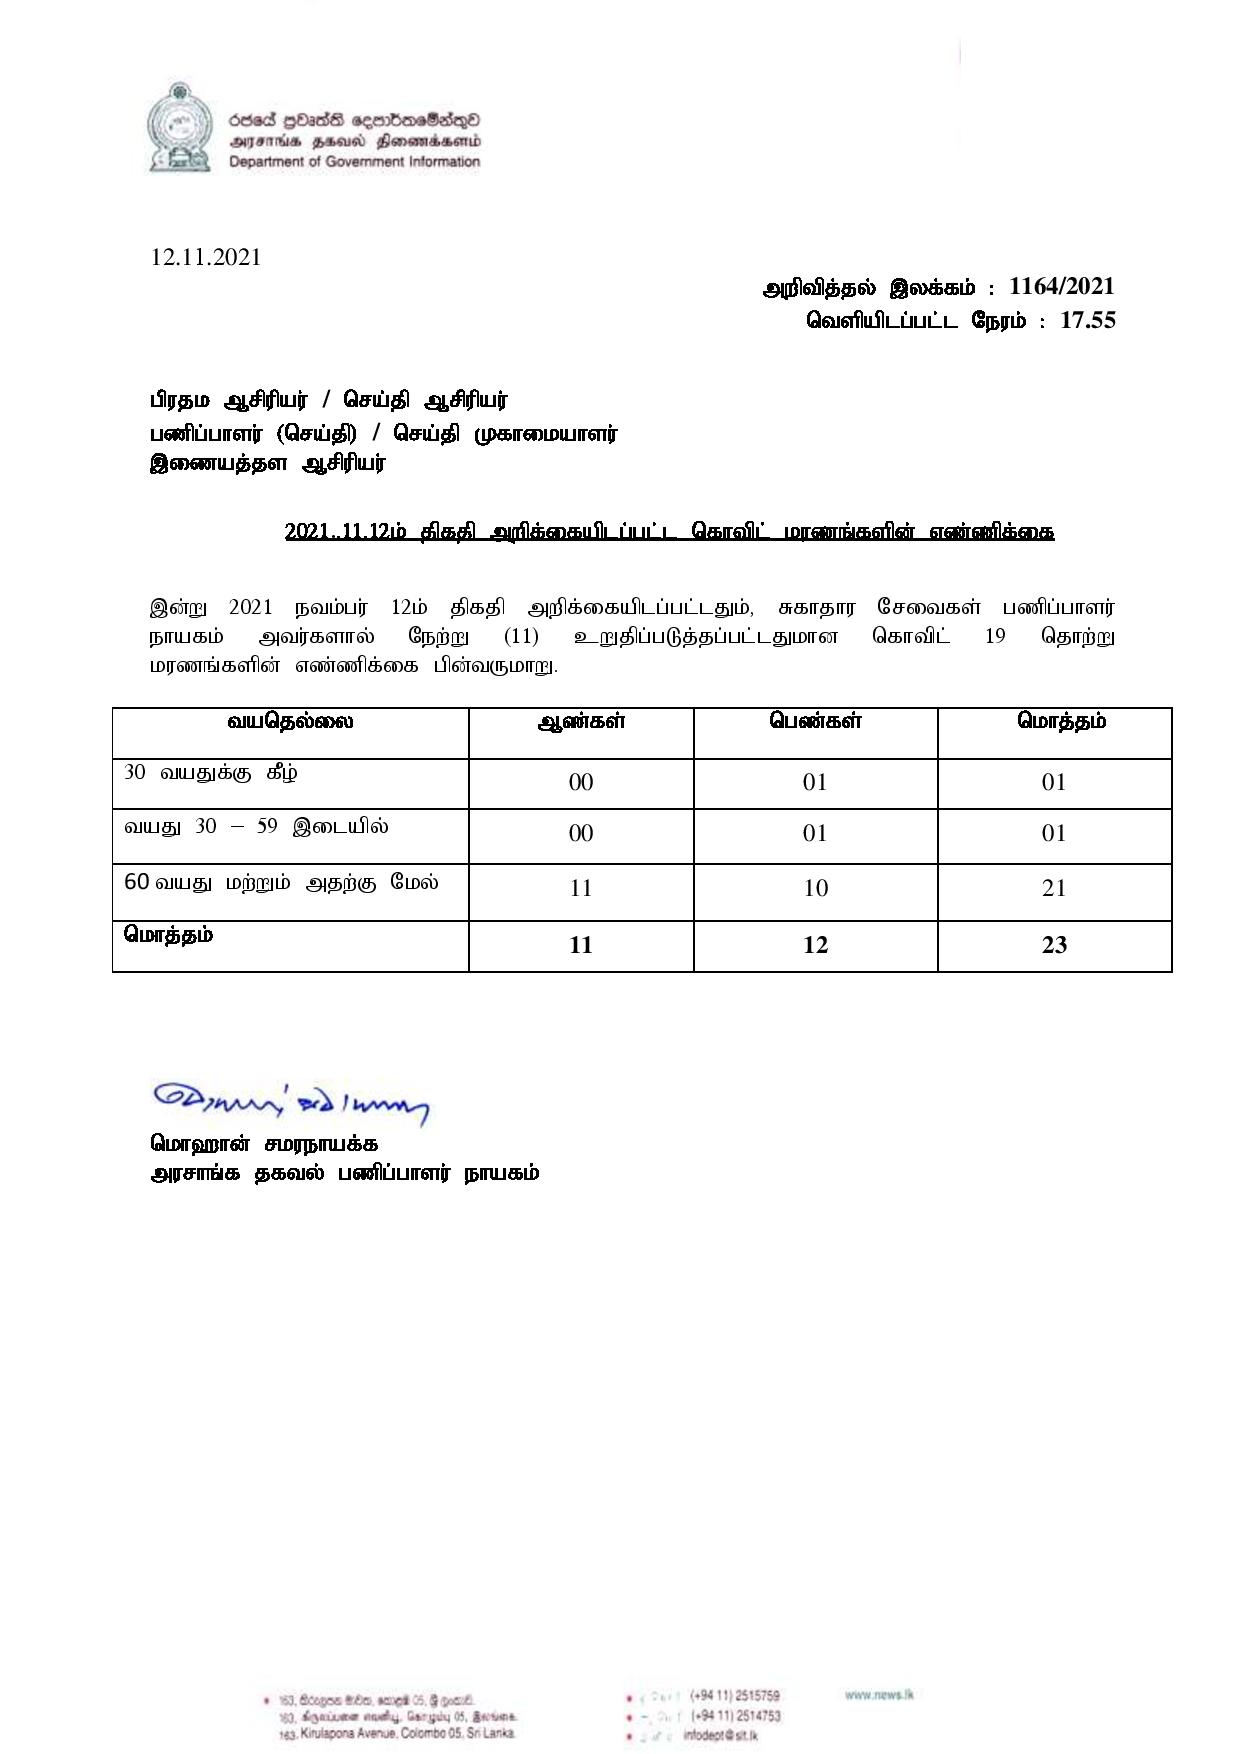 Release No 1164 Tamil page 001